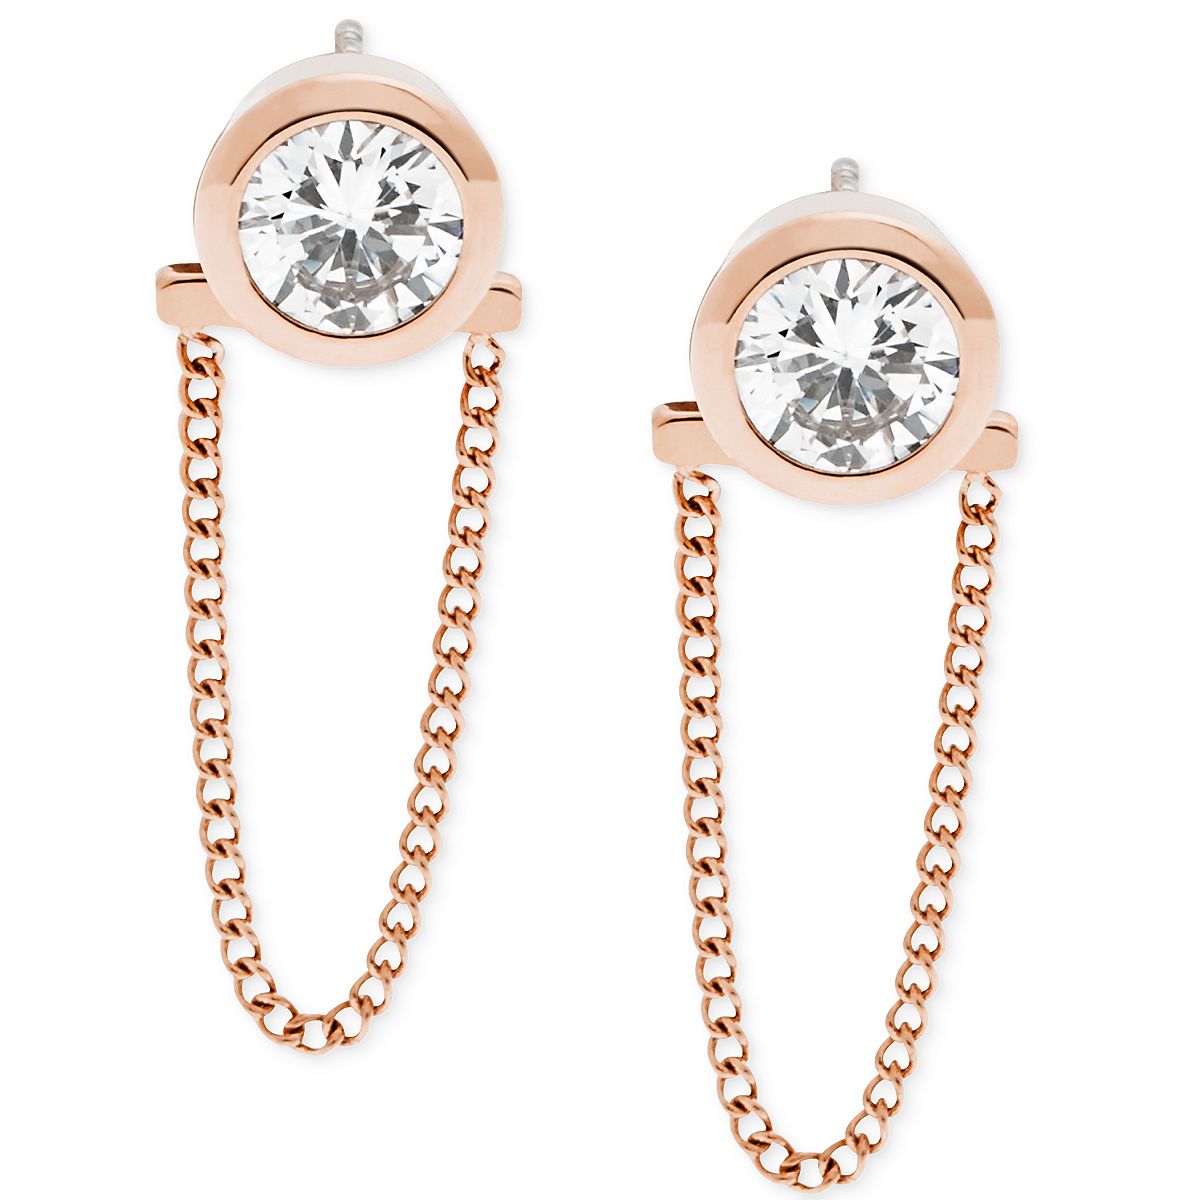 Michael Kors Outet Outlet Crystal Convertible Draped Chain Earrings Rose Gold